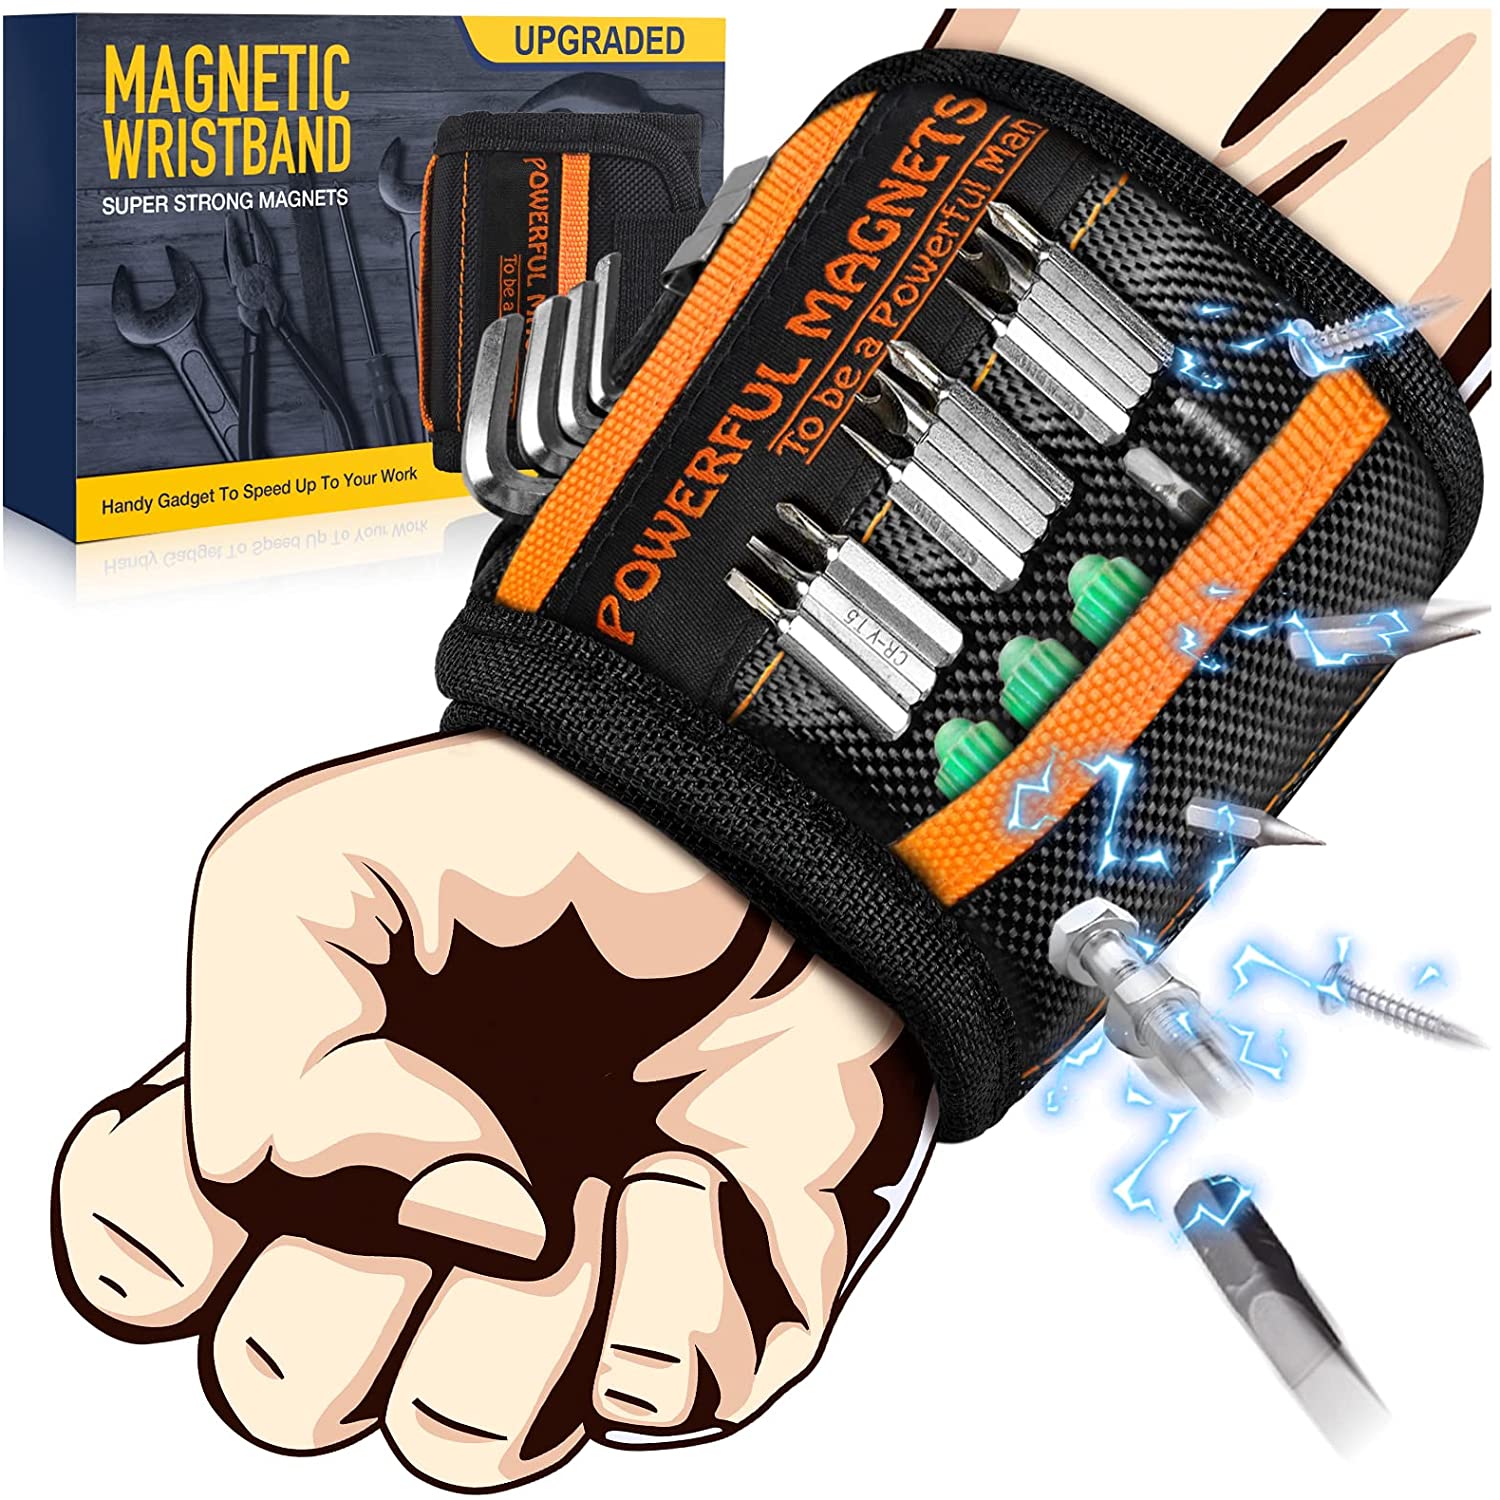 Cool Gadgets Unique Gift Ideas Tool Belt on Fathers Day Dad Birthday Christmas Stocking Stuffers for Women Magnets Drill Screws Holder for Husband Boyfriend Mens Tool Gifts Magnetic Wristband 